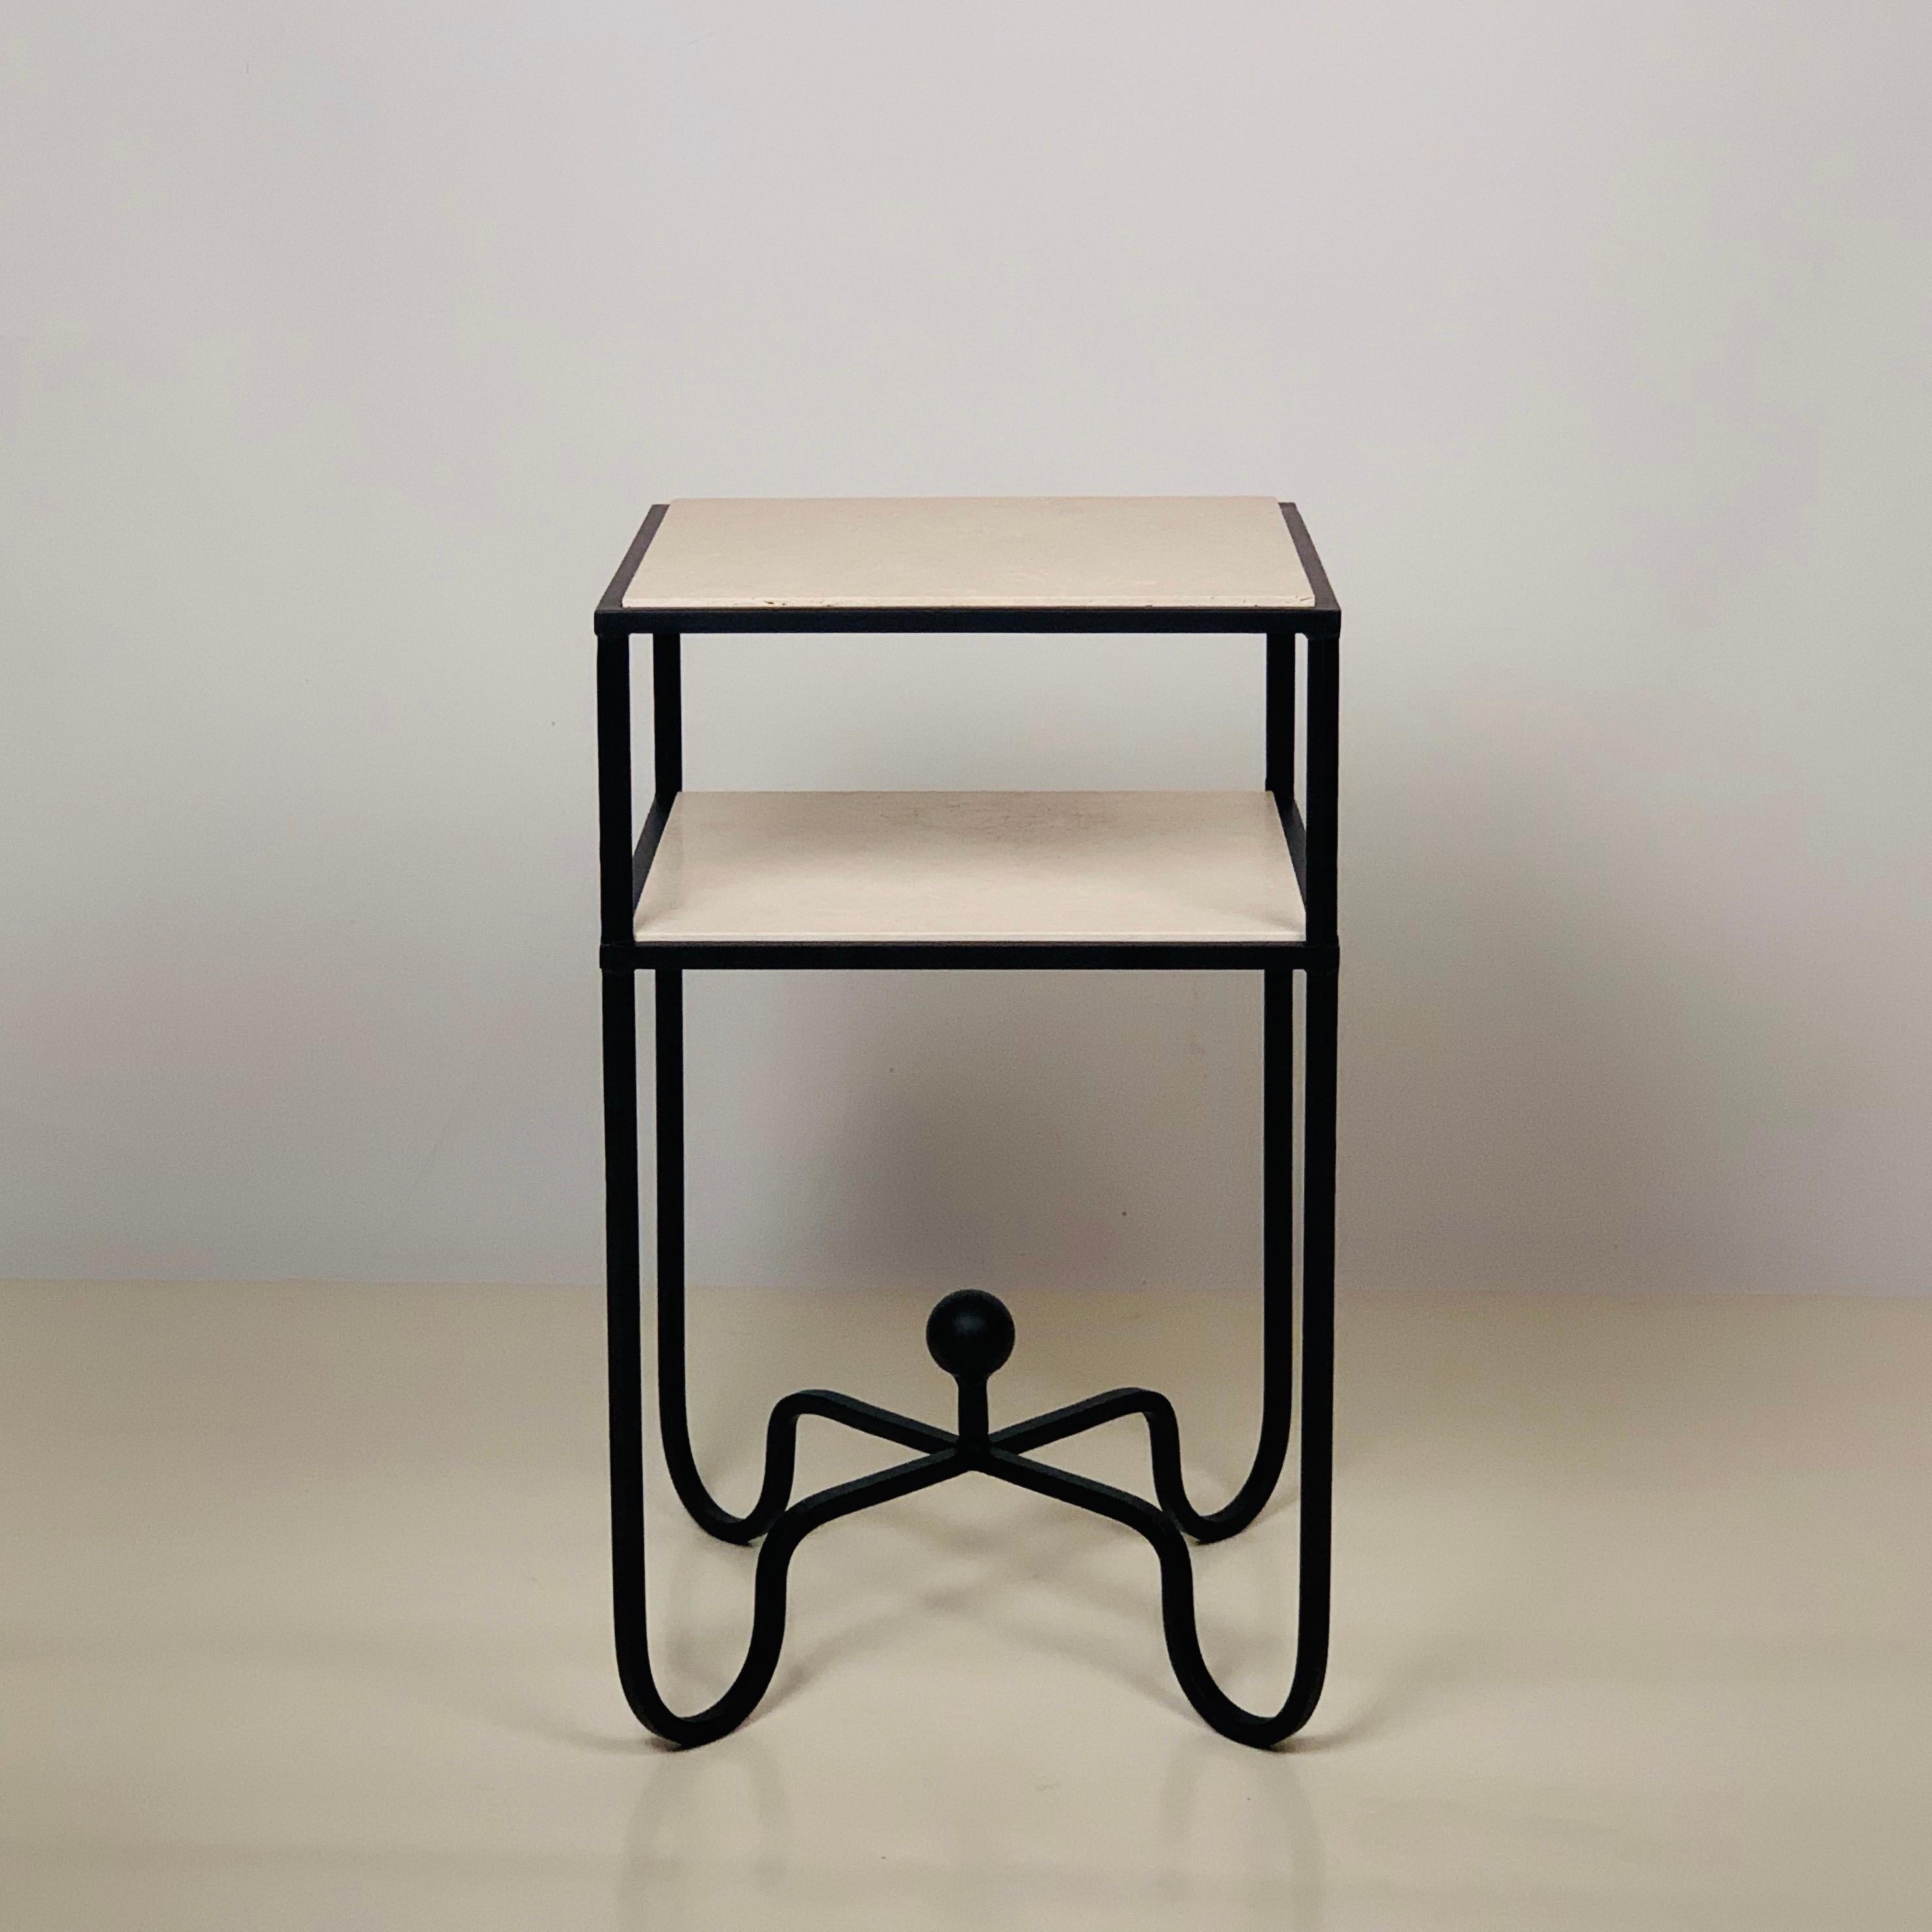 Modern In-Stock Pair of 2-Tier Entretoise Side Tables by Design Frères For Sale